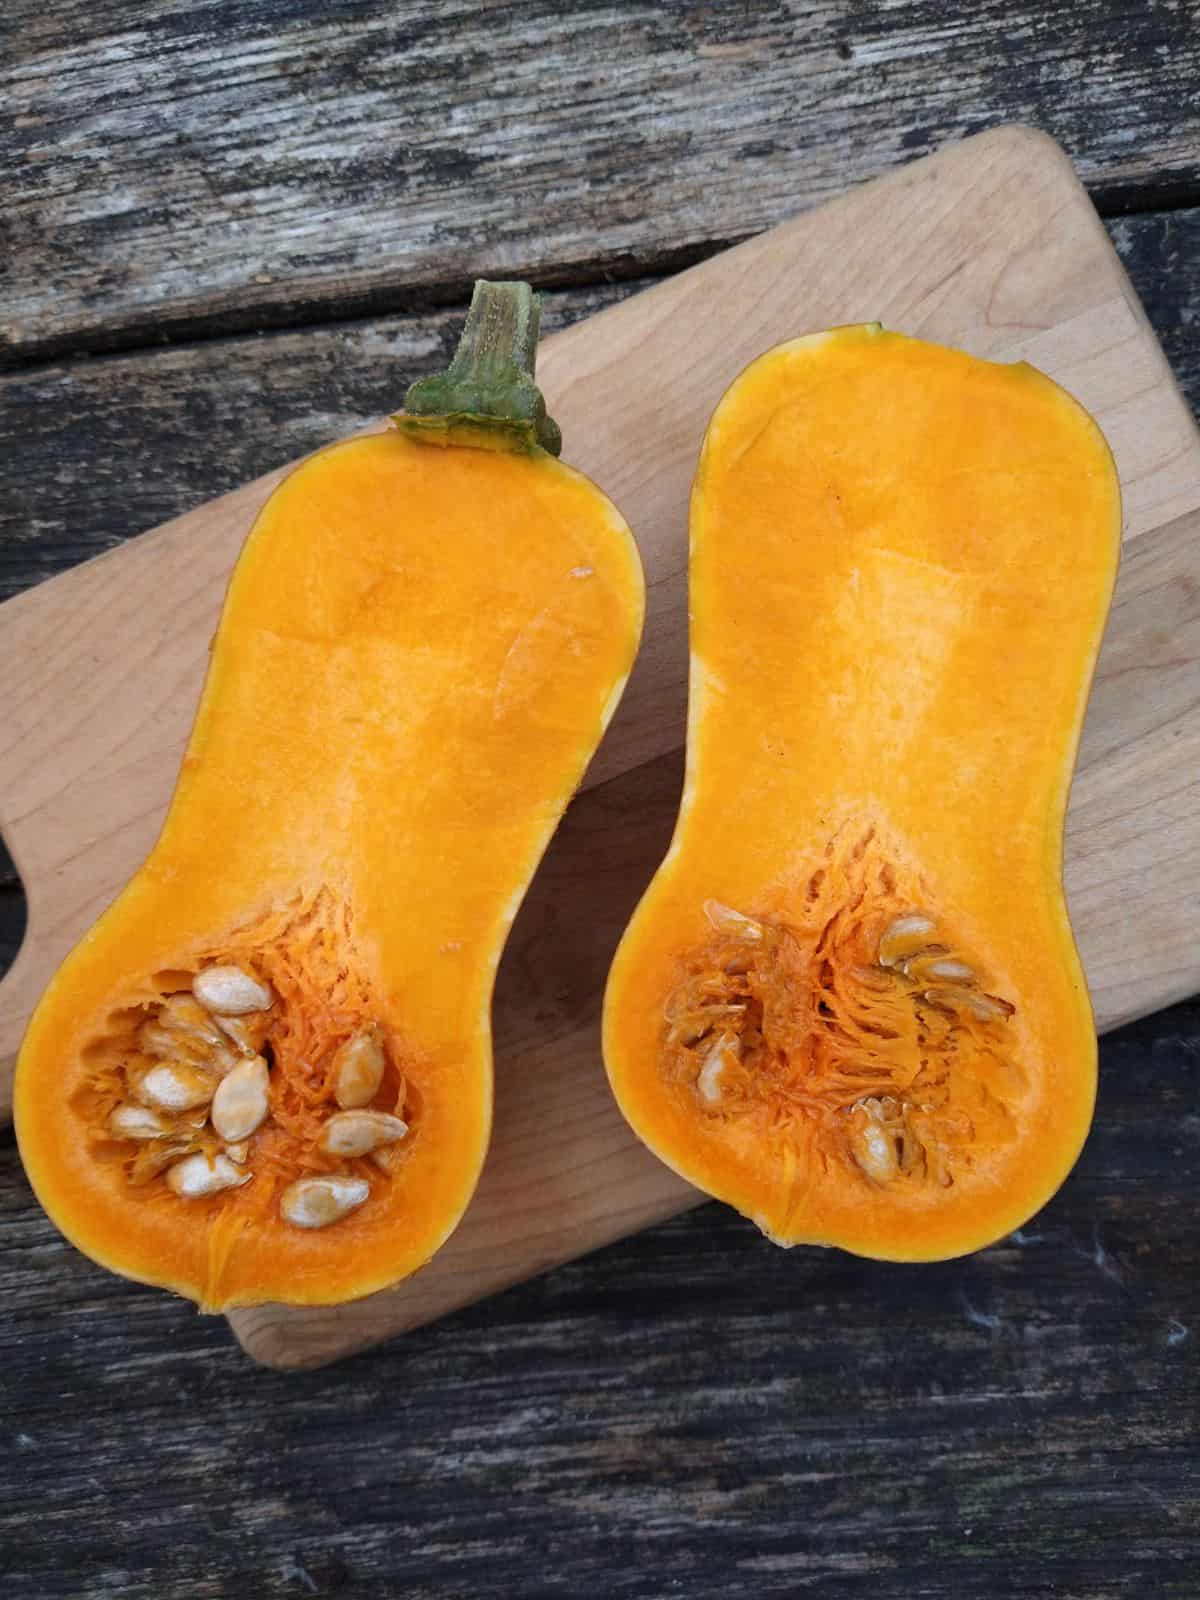 Two halves of a raw Honeynut squash on a wood cutting board on a wood picnic table.